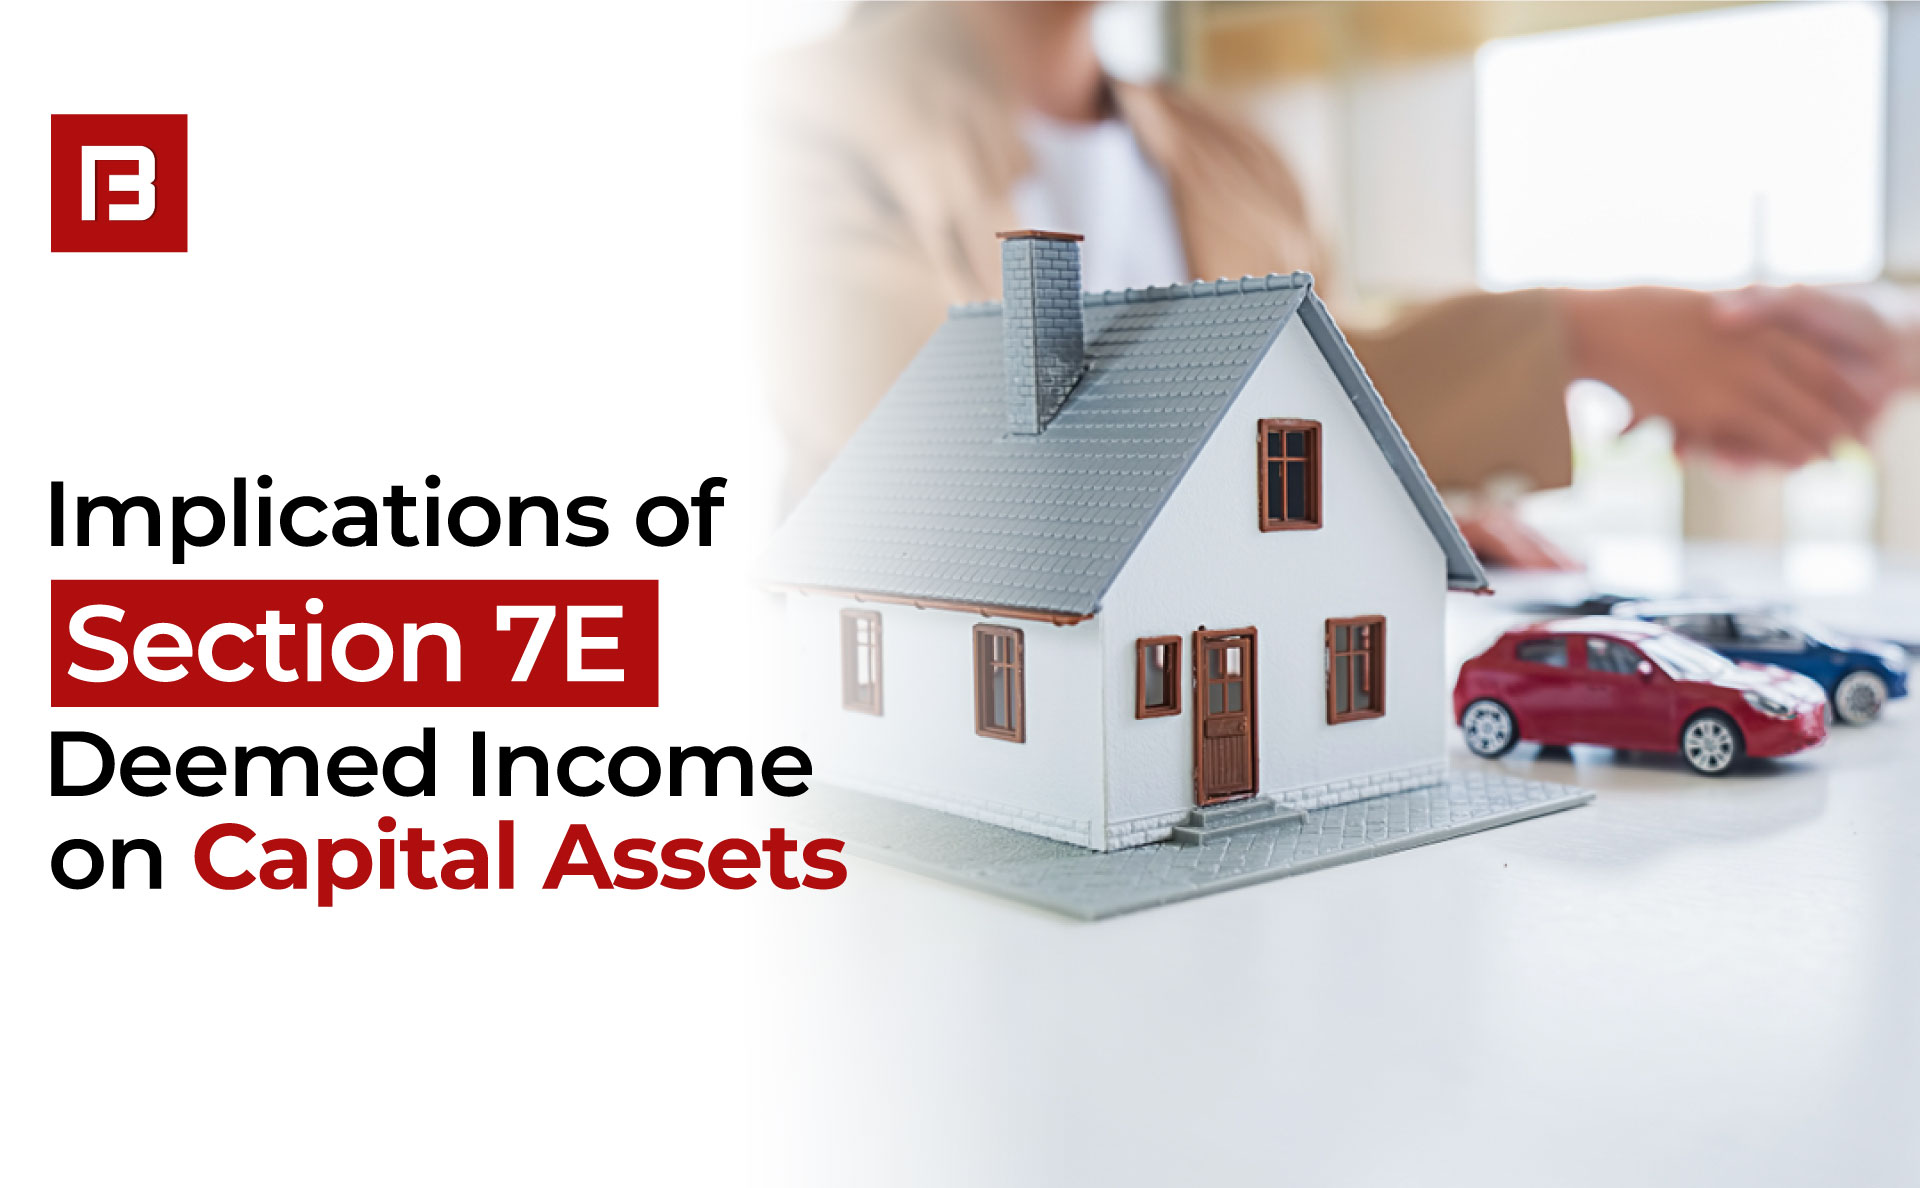 Understanding Implications of Section 7E – Deemed Income on Capital Assets